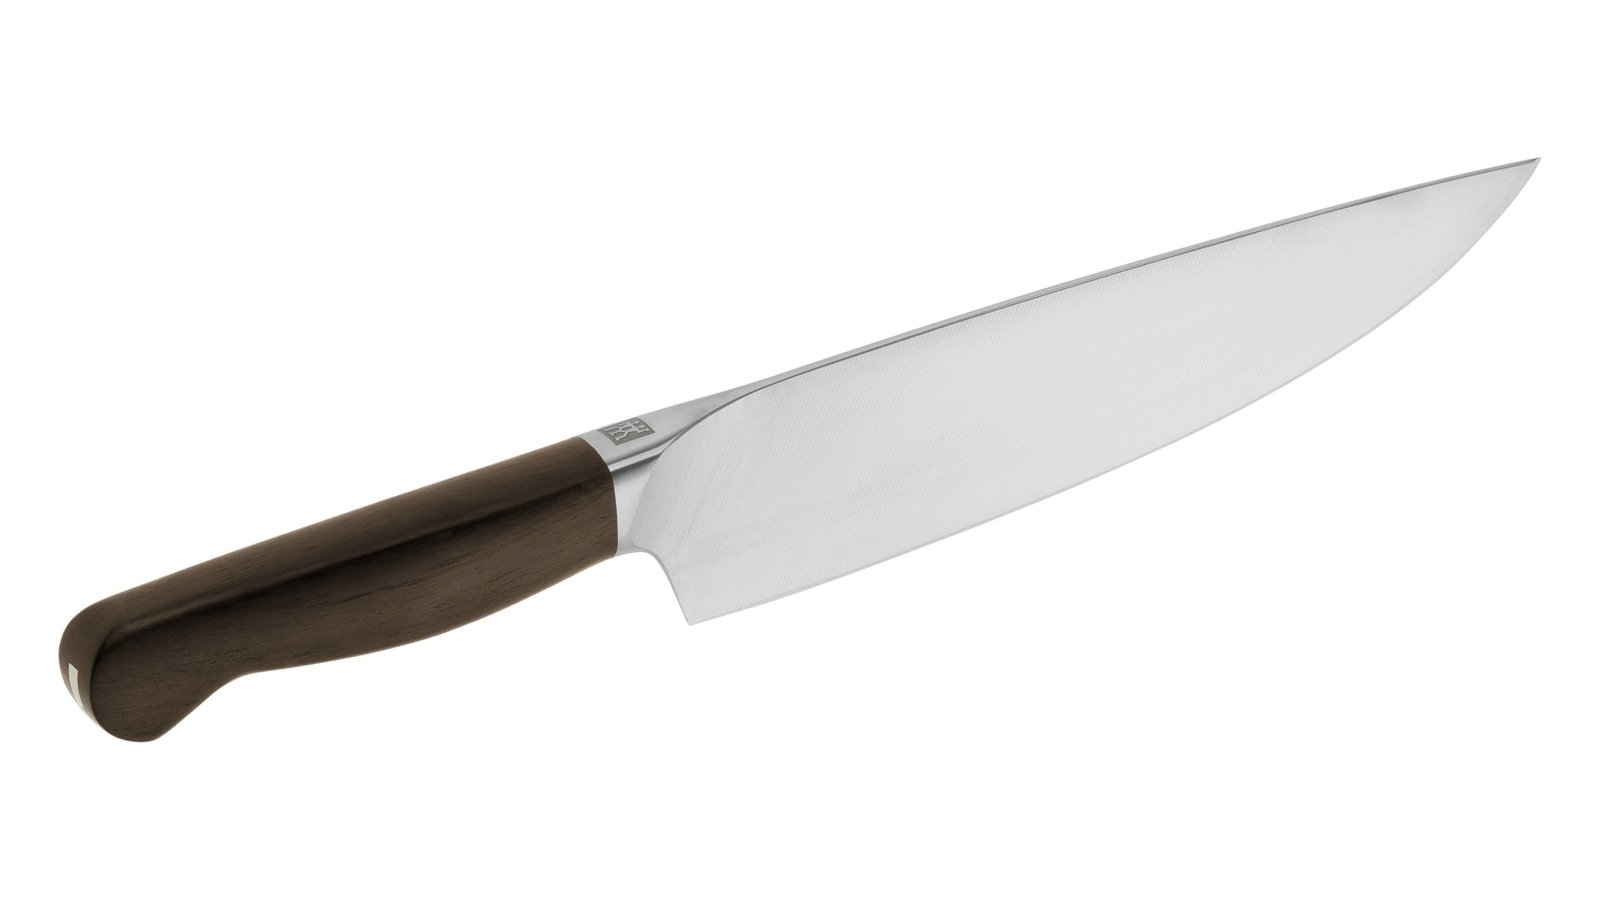 Zwilling Twin 1731 8-inch Chef's Knife